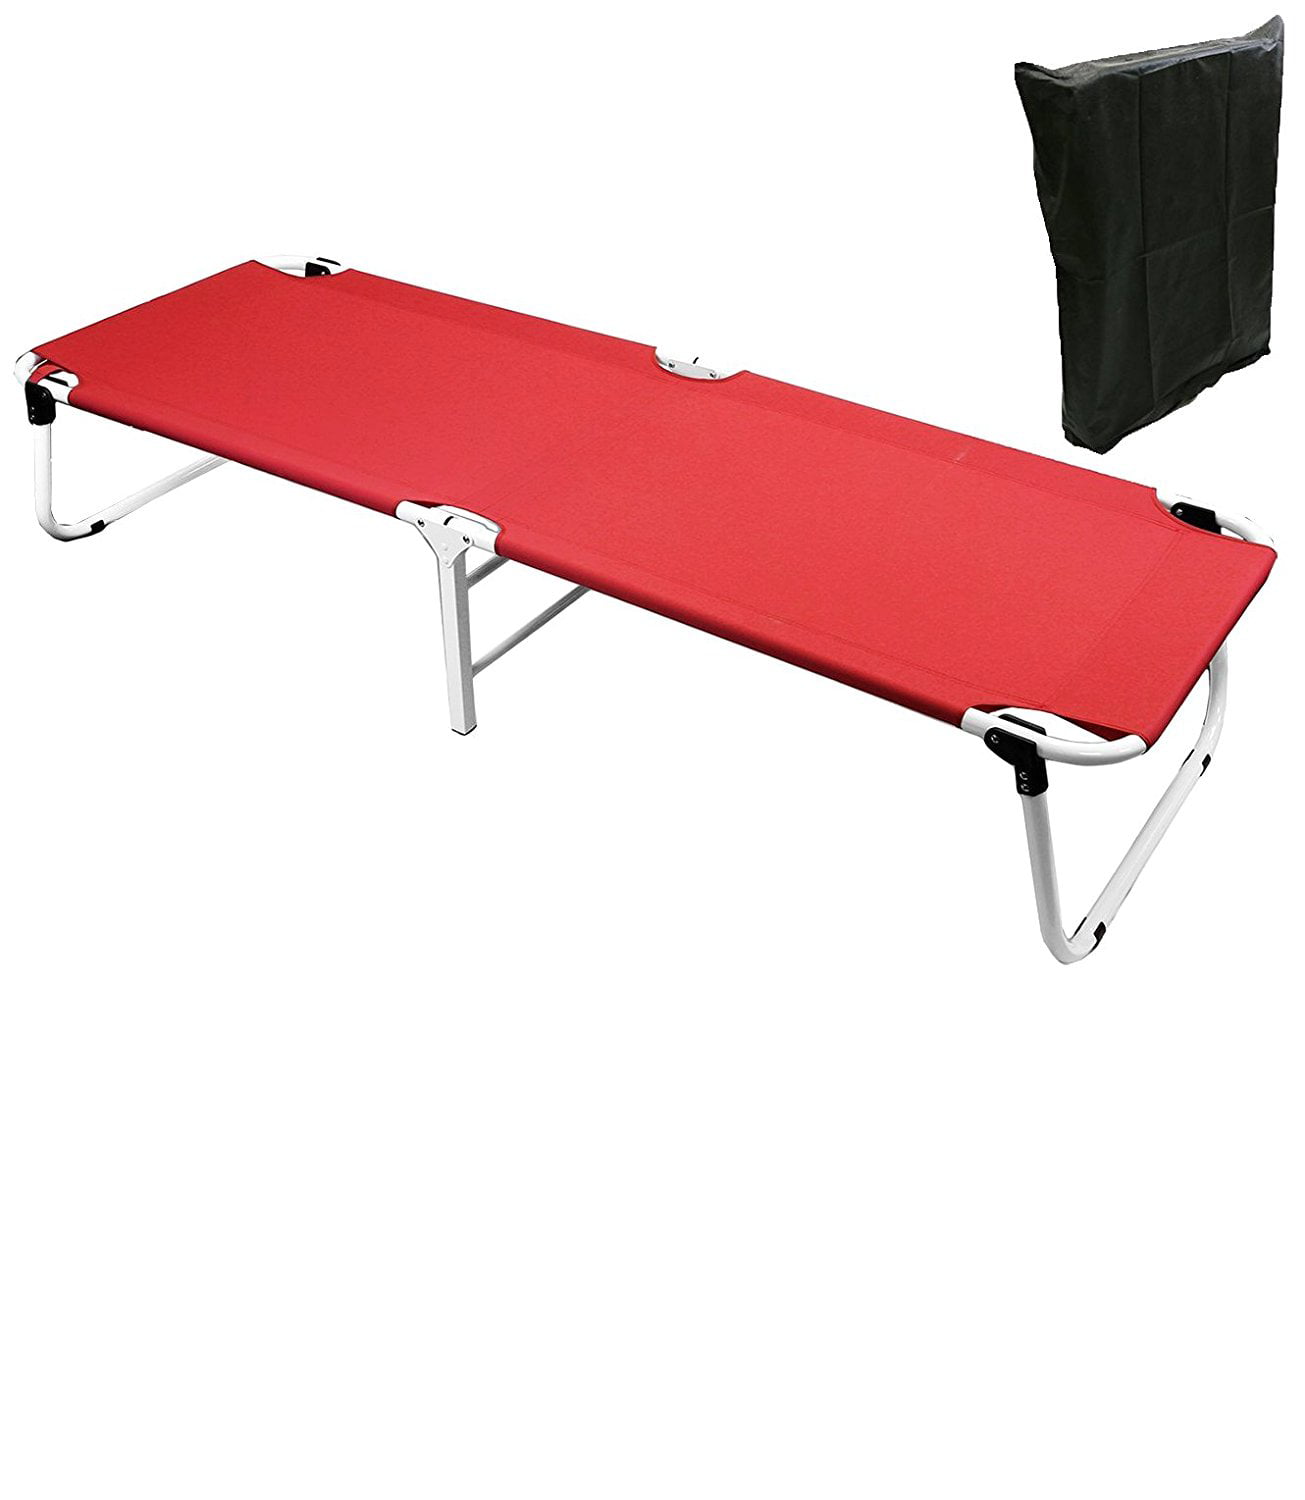 Magshion Portable Military Fold Up Camping Bed Cot Plus Free Storage Bag Red